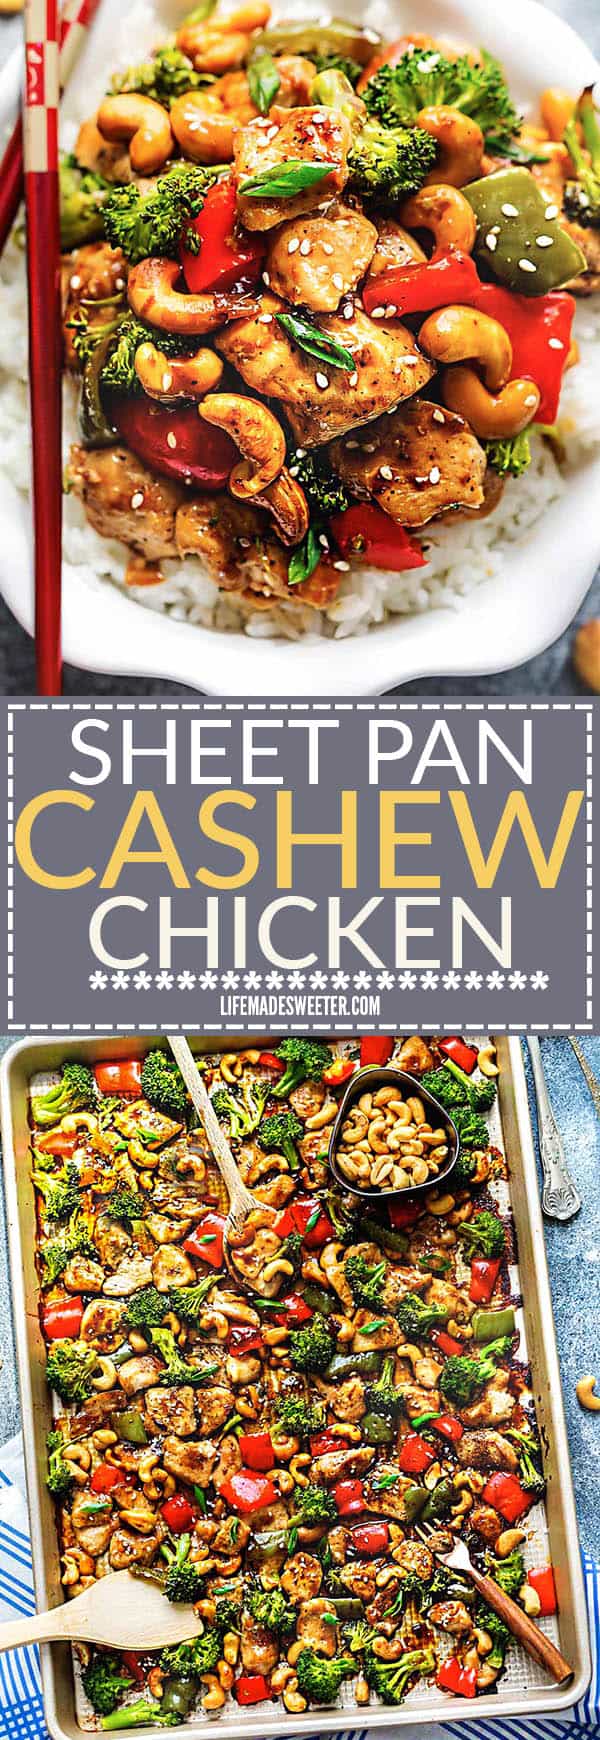 Cashew Chicken Sheet Pan has all the flavors of the popular Chinese restaurant takeout dish made on a sheet pan. Best of all, super easy to make with paleo friendly options. Plus a serving of tender crisp broccoli and red & green bell peppers for a healthier meal. Perfect for busy weeknights! Plus a step-by-step how to video! Weekly Sunday meal prep for the week and leftovers are great for lunch bowls & lunchboxes for work or school.